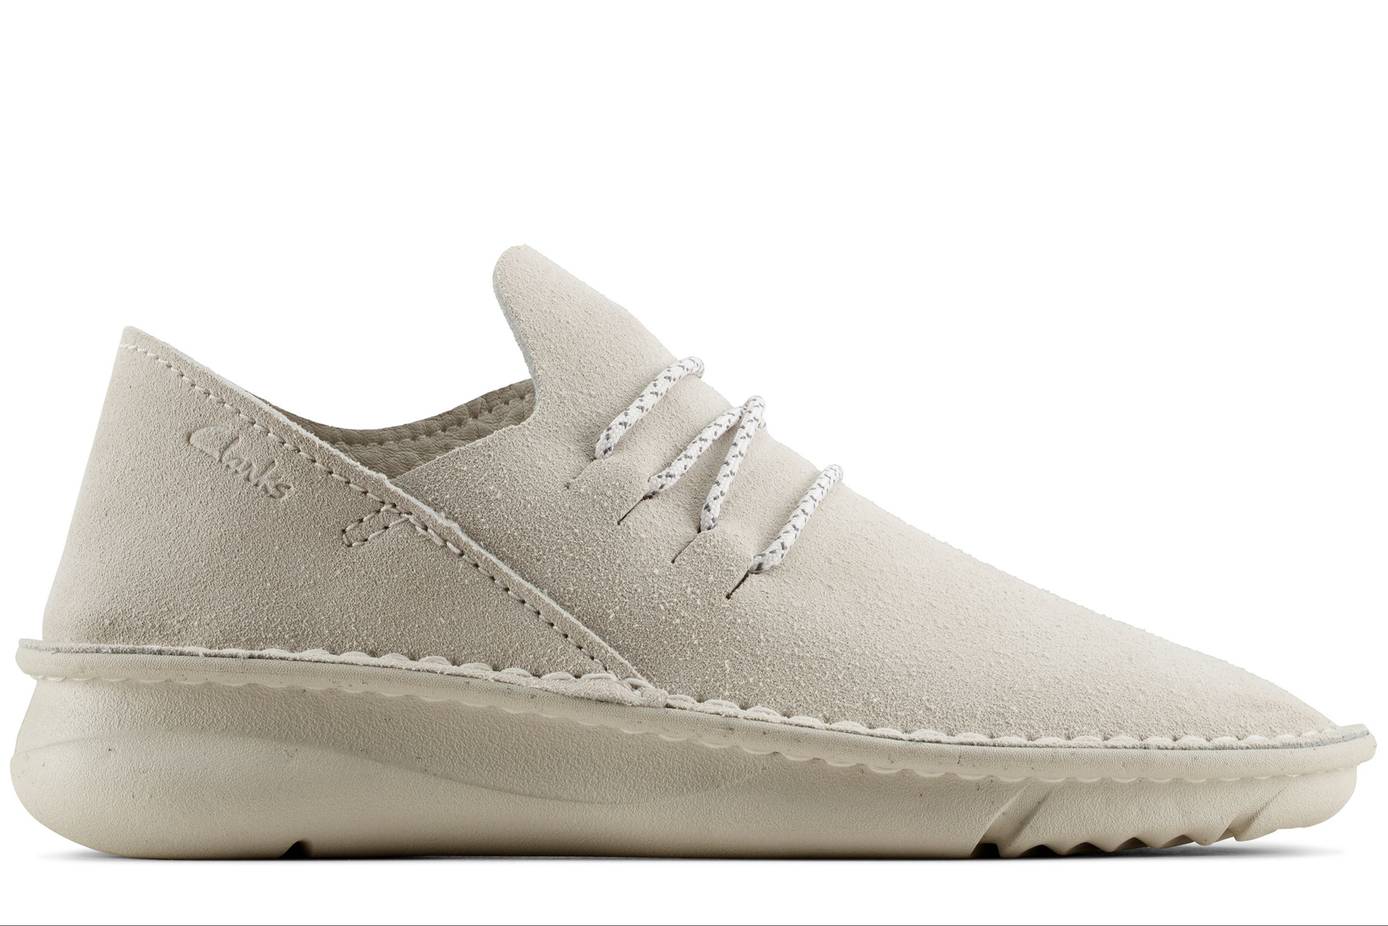 Clarks sneaker made with recycled